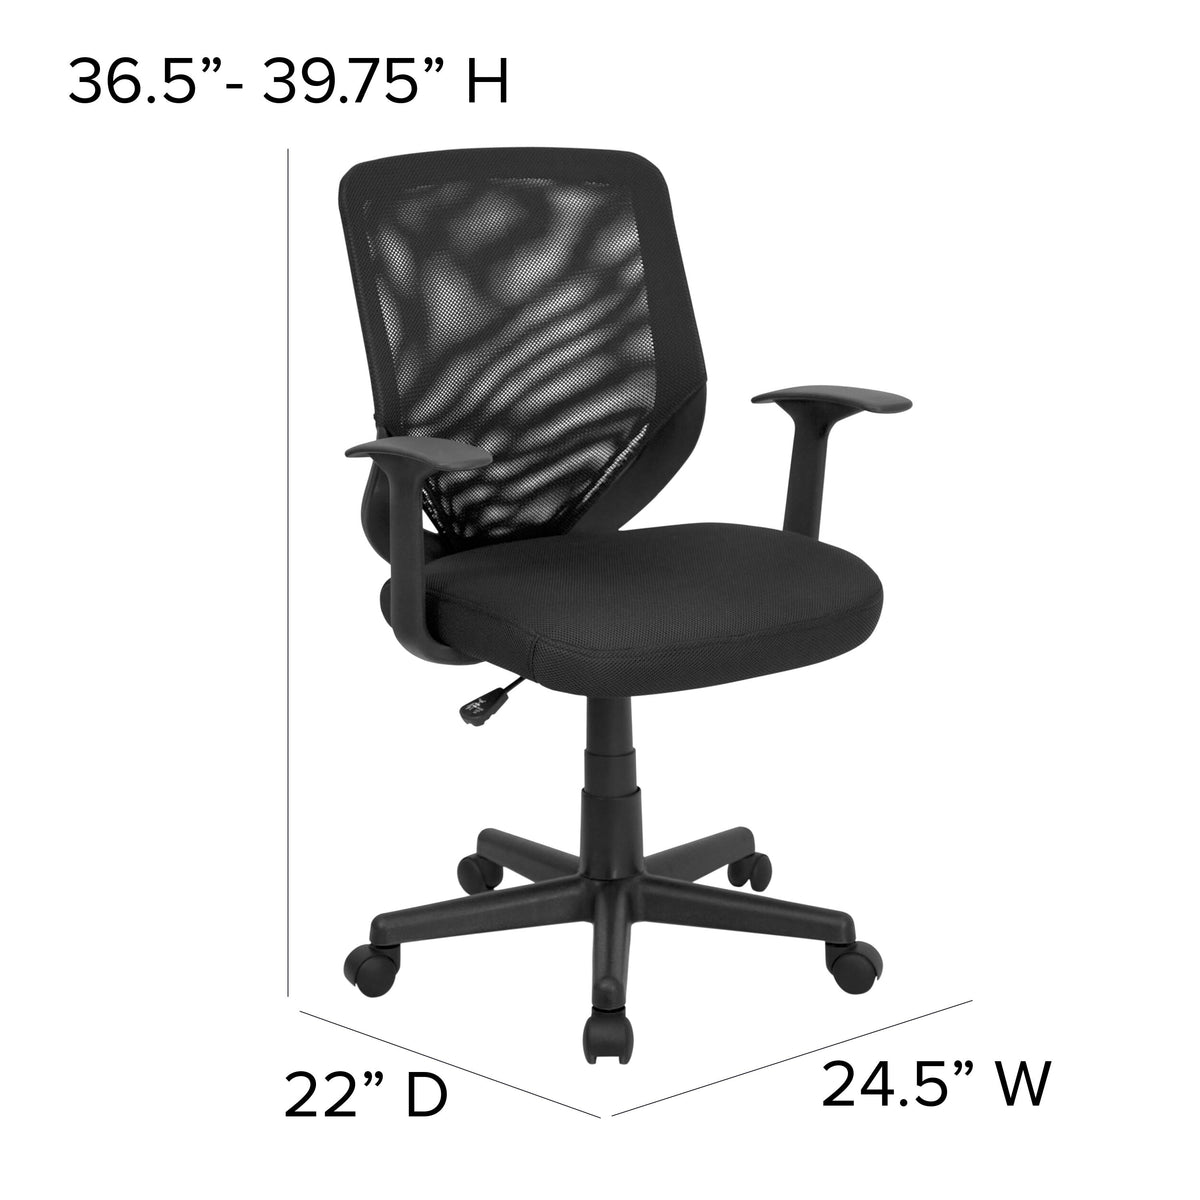 Mid-Back Black Mesh Tapered Back Swivel Task Office Chair with T-Arms